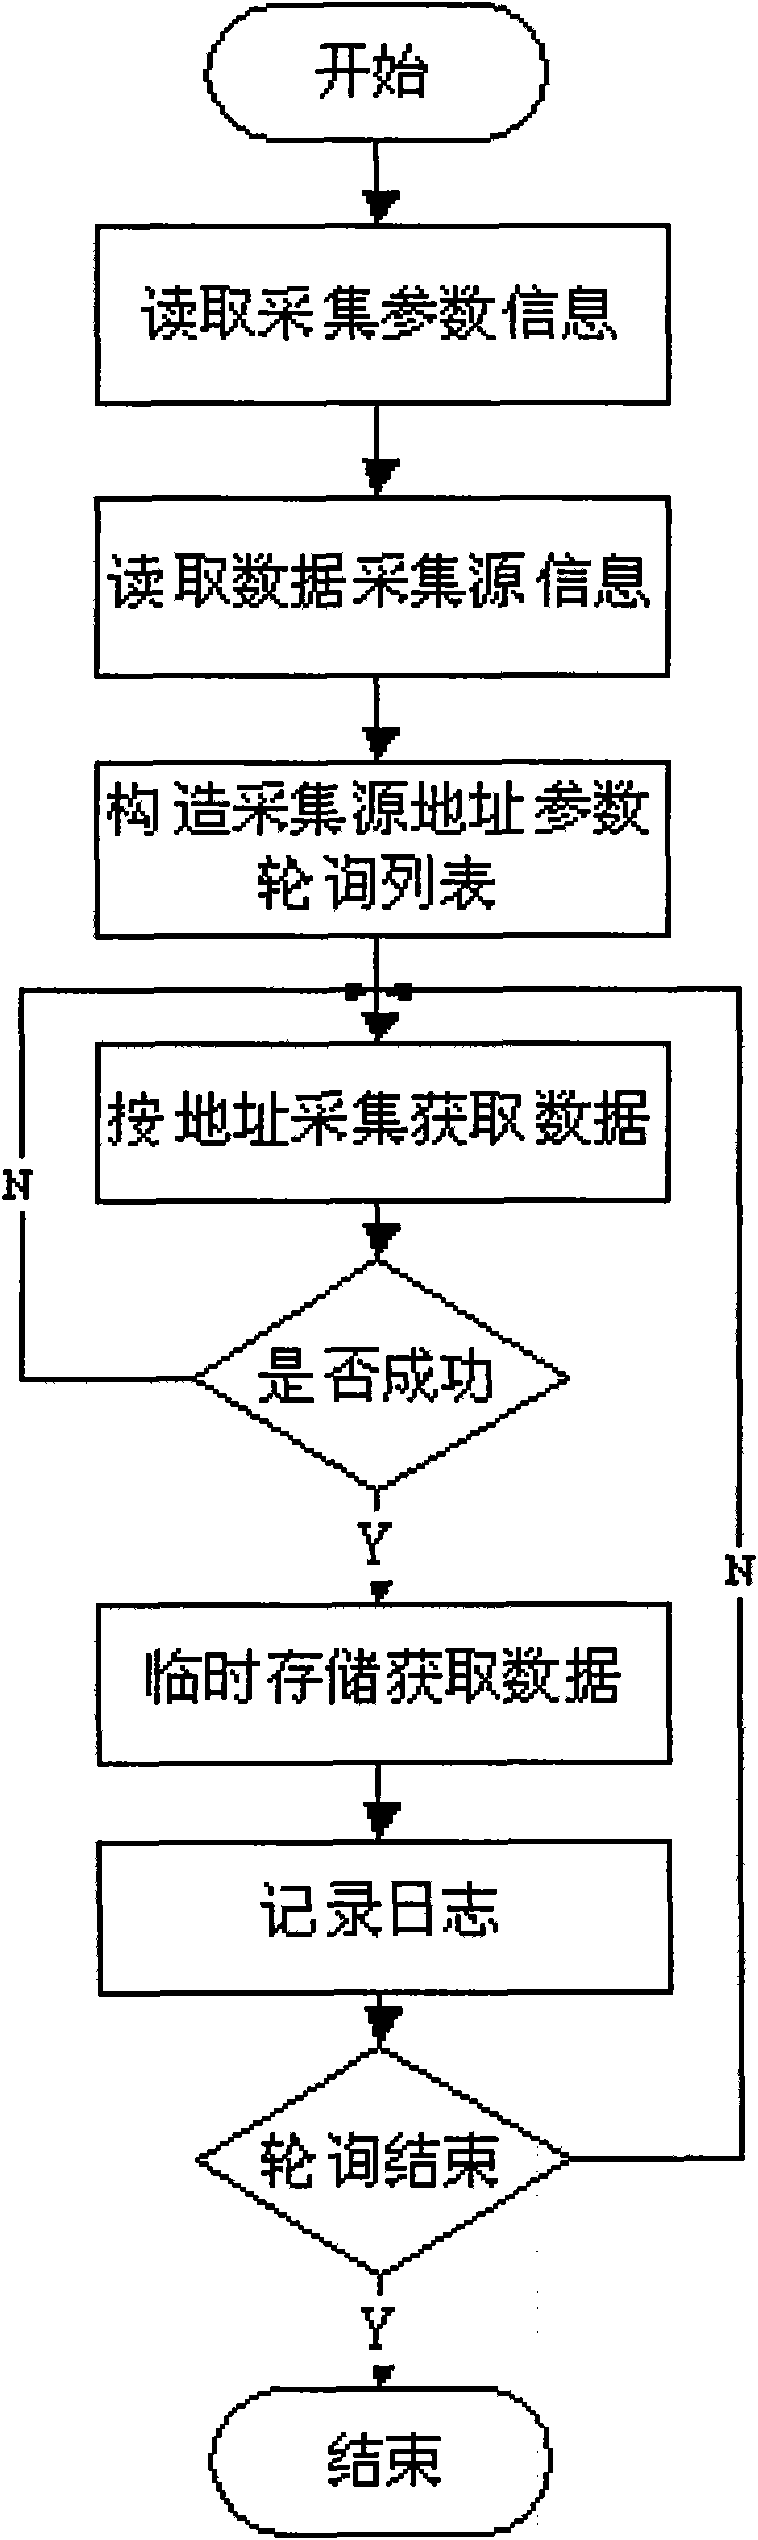 Flight information data acquisition unit and processing method thereof